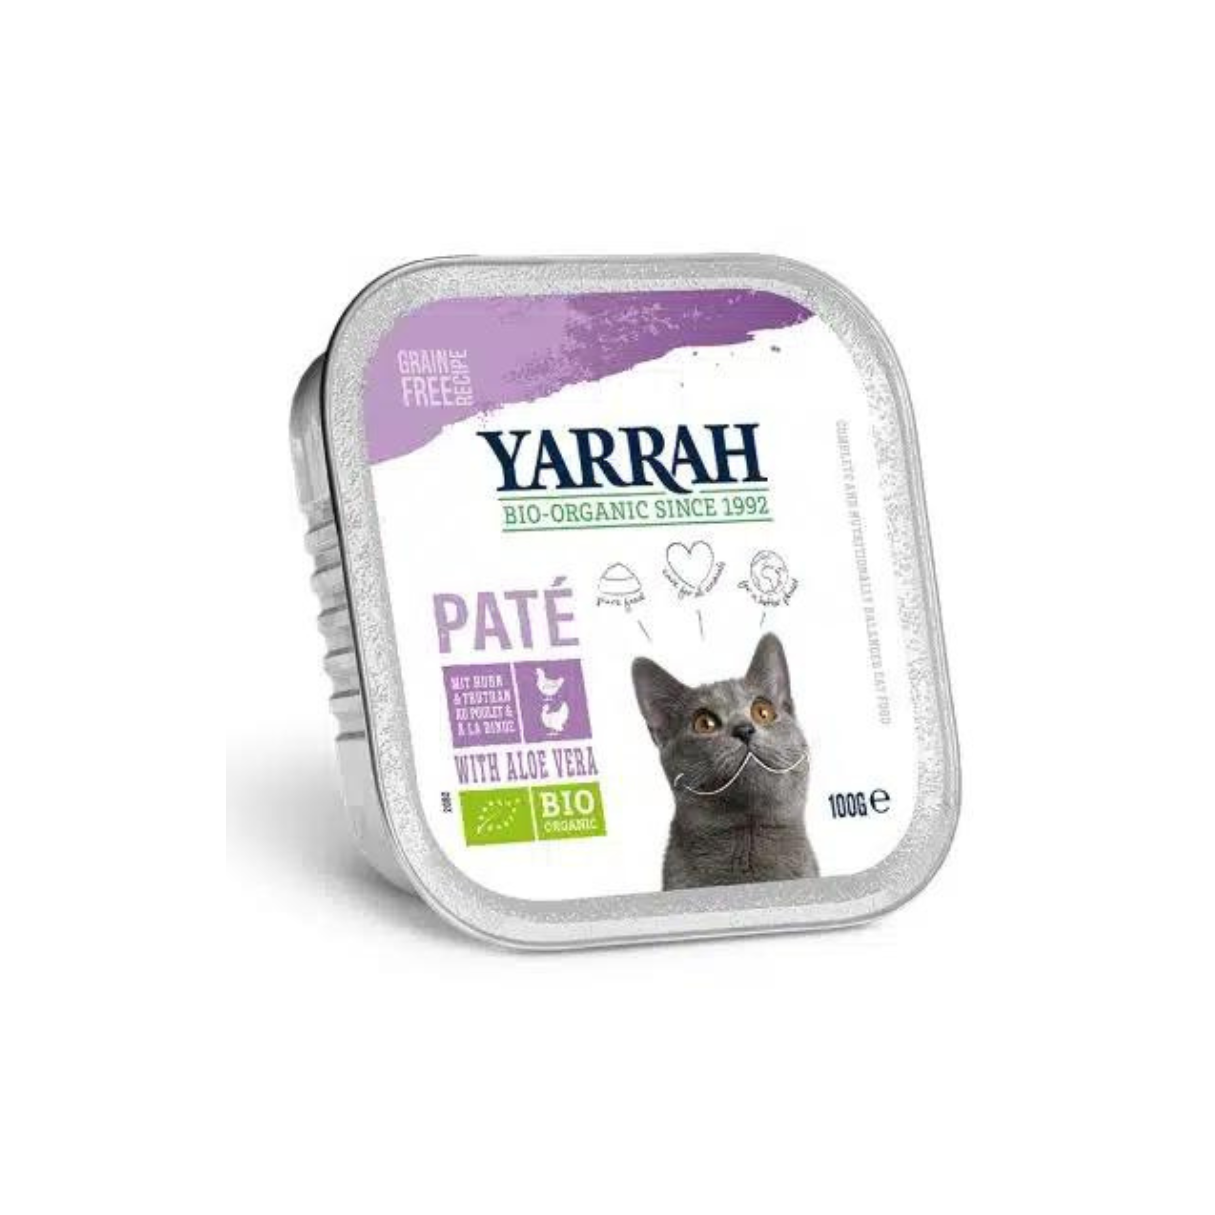 Yarrah pate for cats BIO turkey, chicken with aloe vera. From ecological livestock. It does not contain grains, so it prevents allergies and promotes digestion.